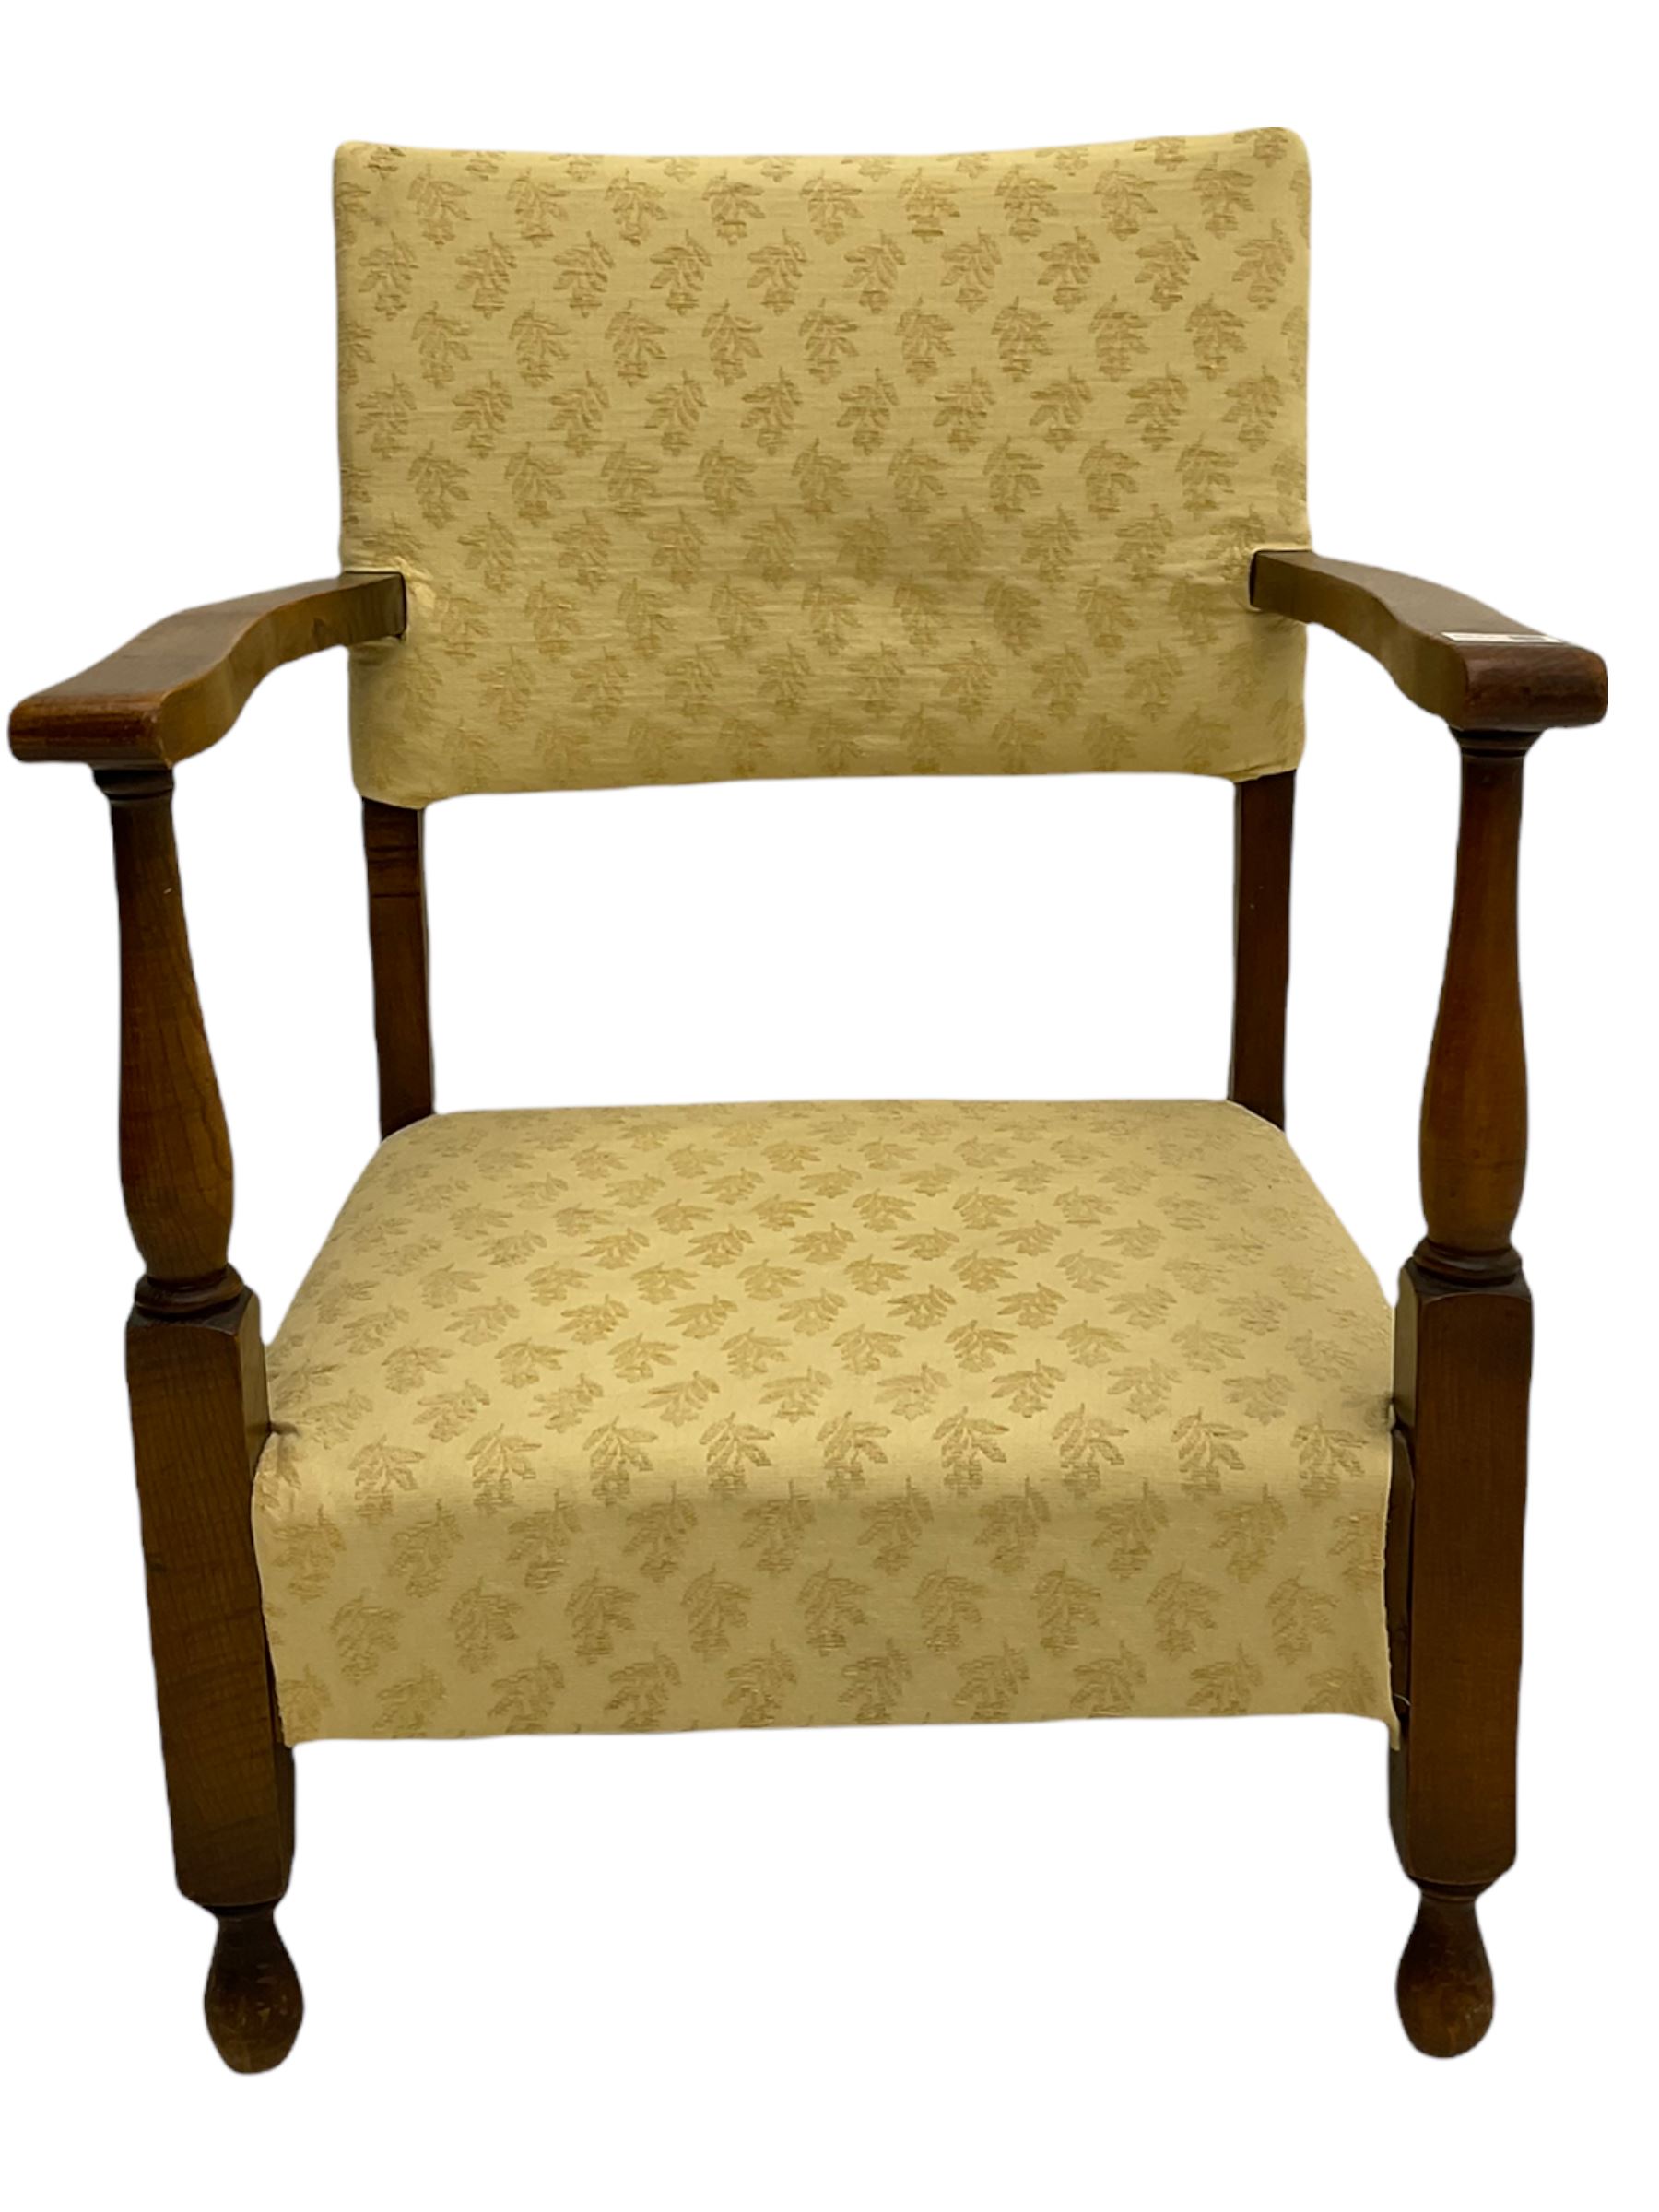 Two early 20th century beech framed low seat chairs - Image 3 of 6